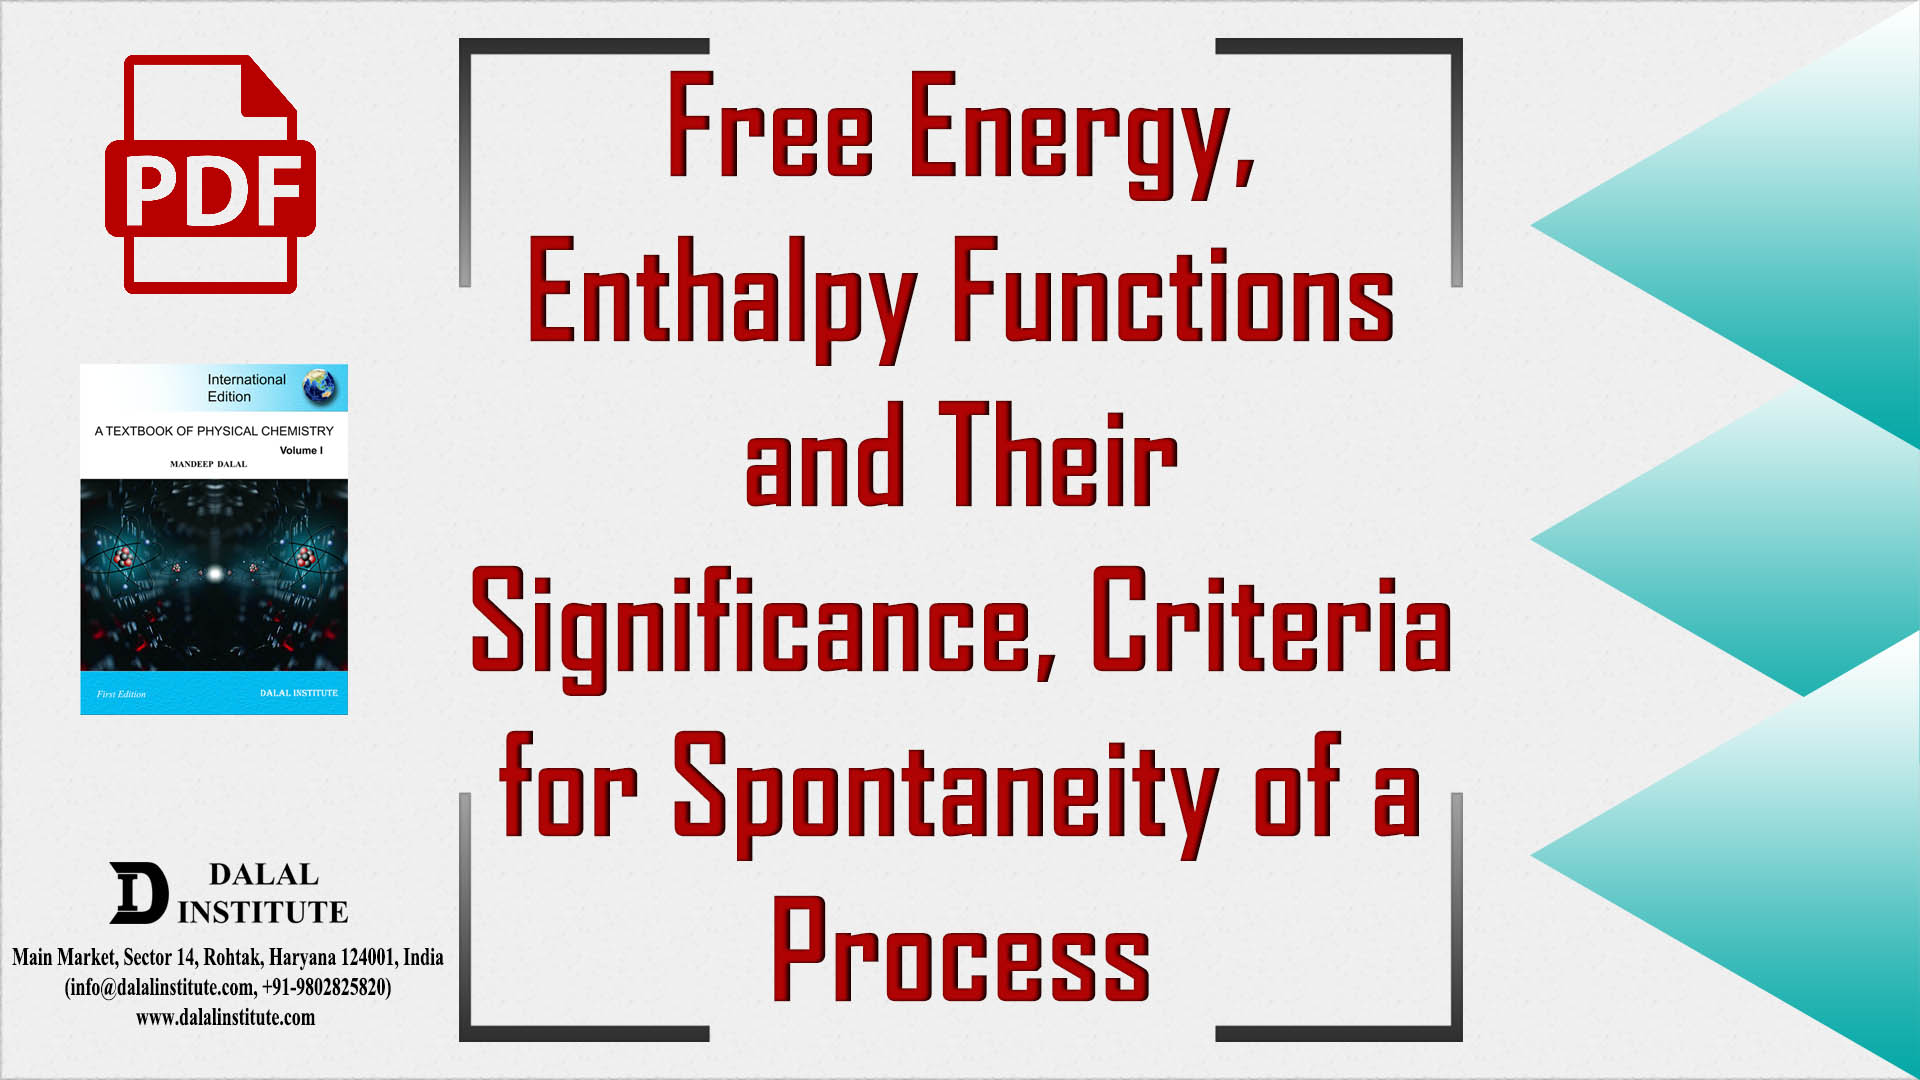 Free Energy Enthalpy Functions And Their Significance Criteria For Spontaneity Of A Process 6808